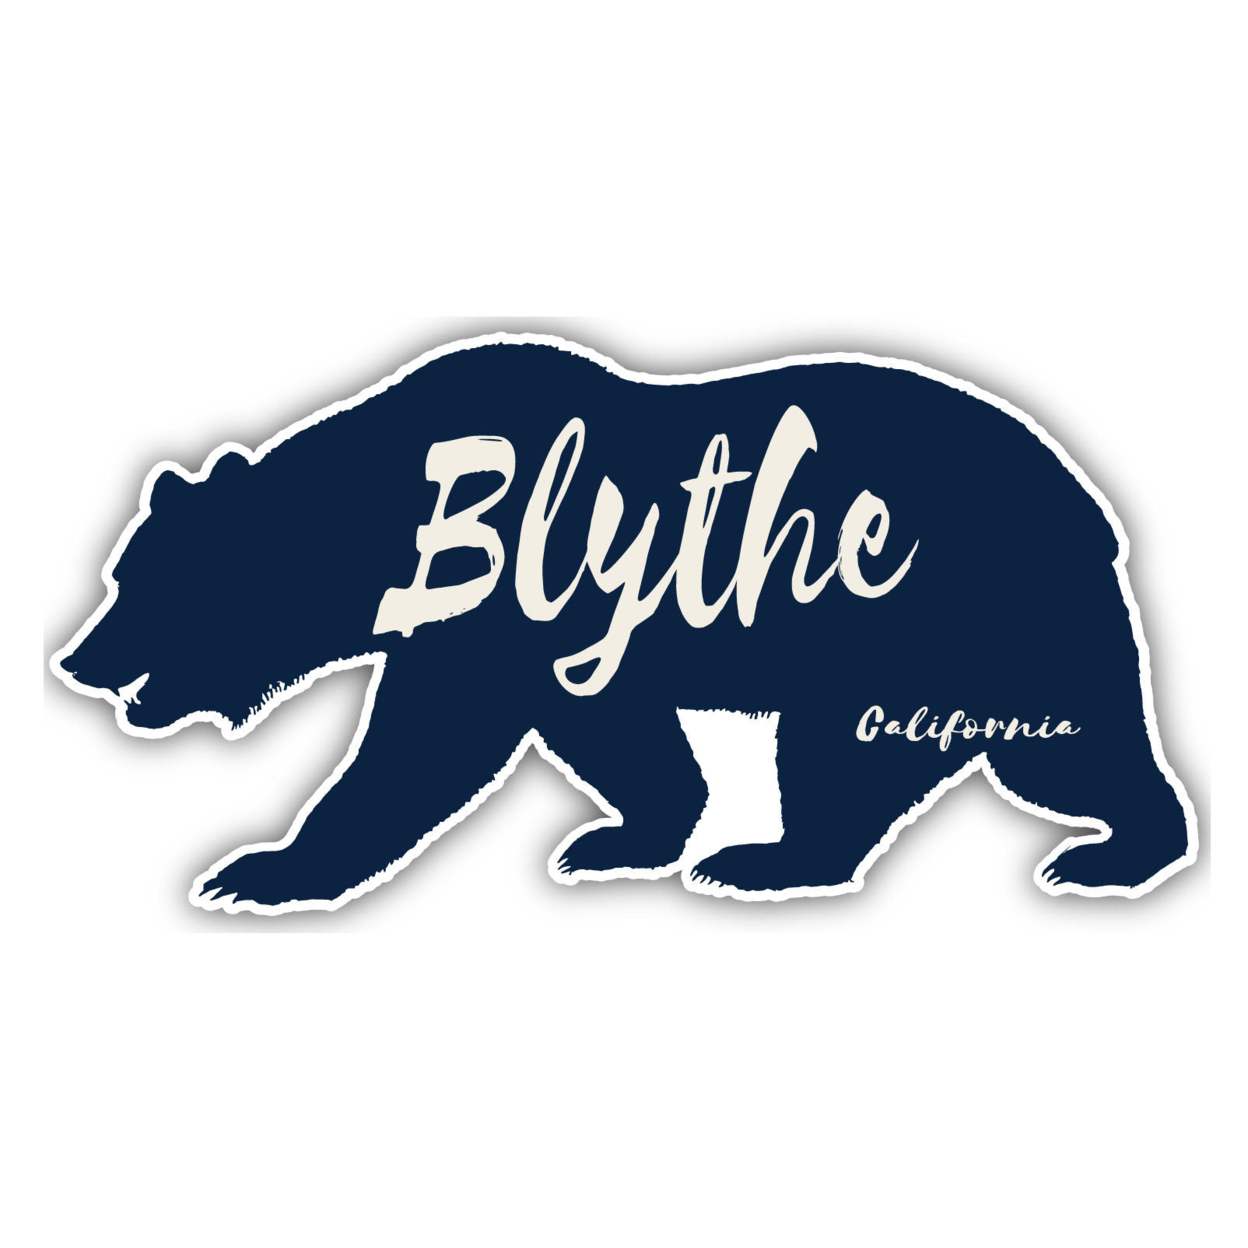 Blythe California Souvenir Decorative Stickers (Choose Theme And Size) - 4-Pack, 6-Inch, Bear